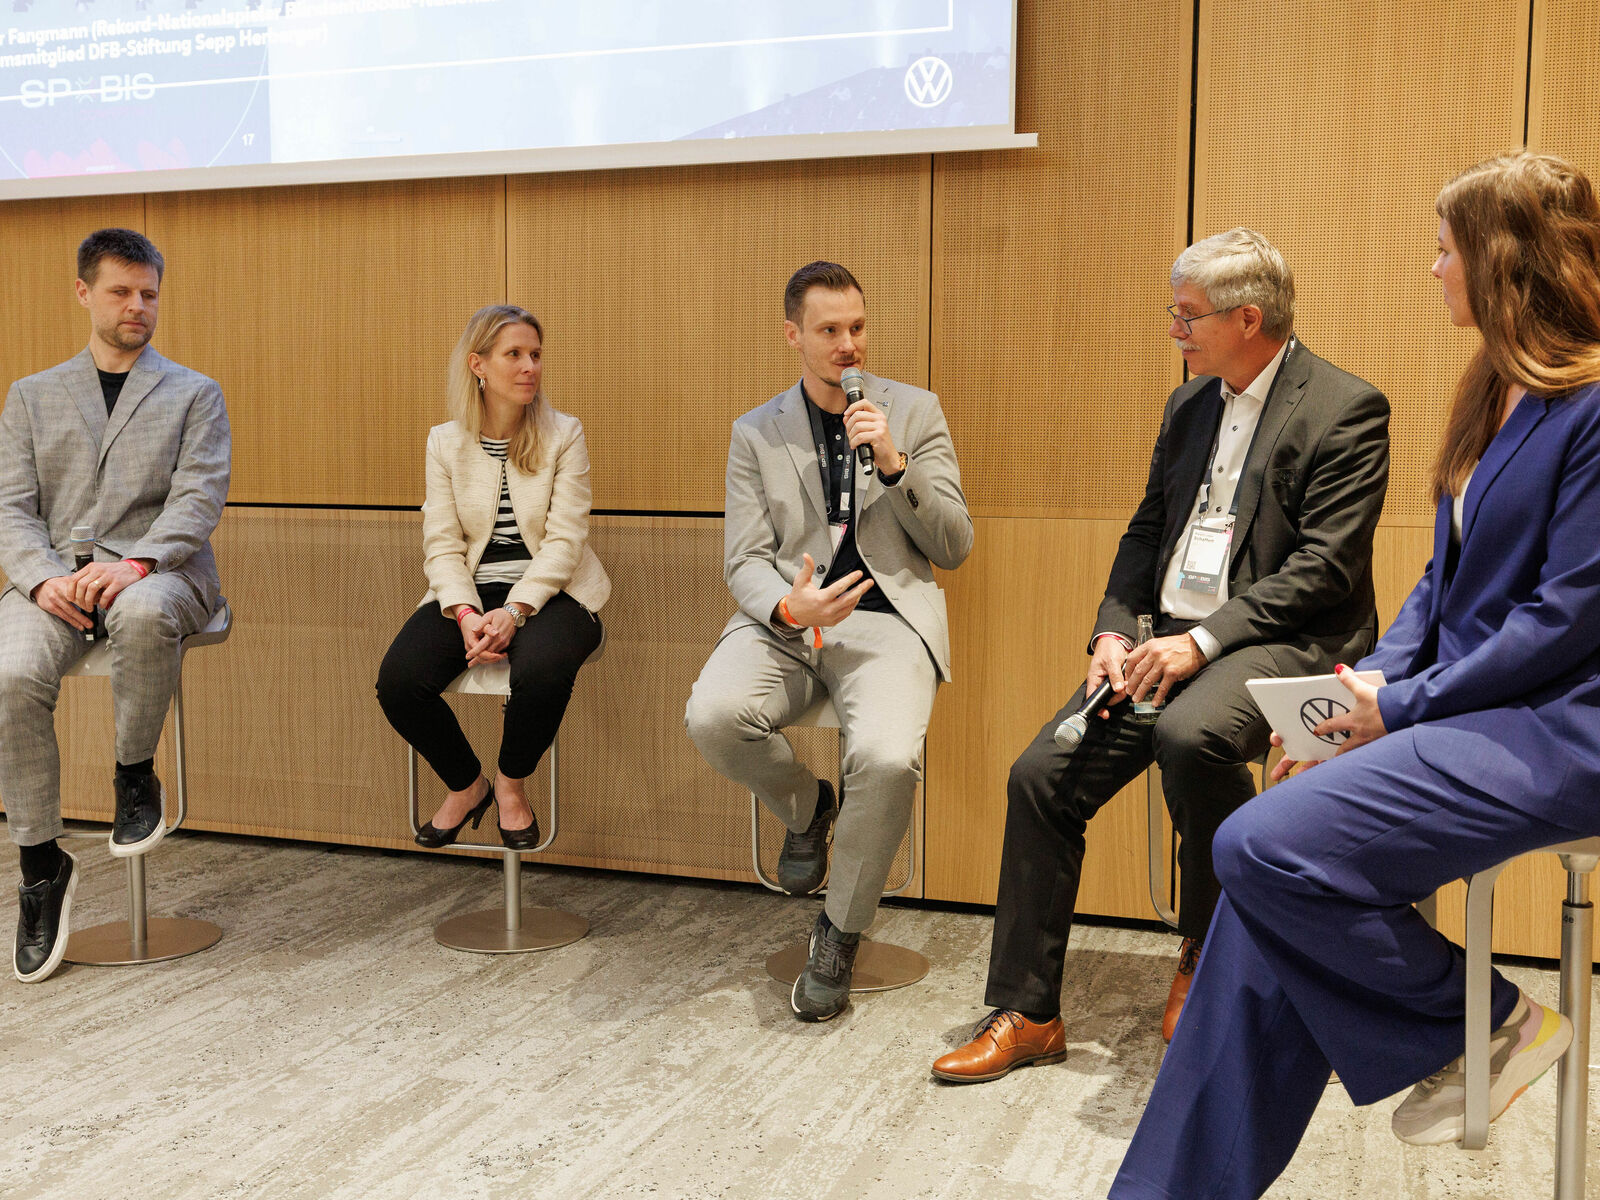 Volkswagen and DFB at SPOBIS: How inclusion can succeed in organised football